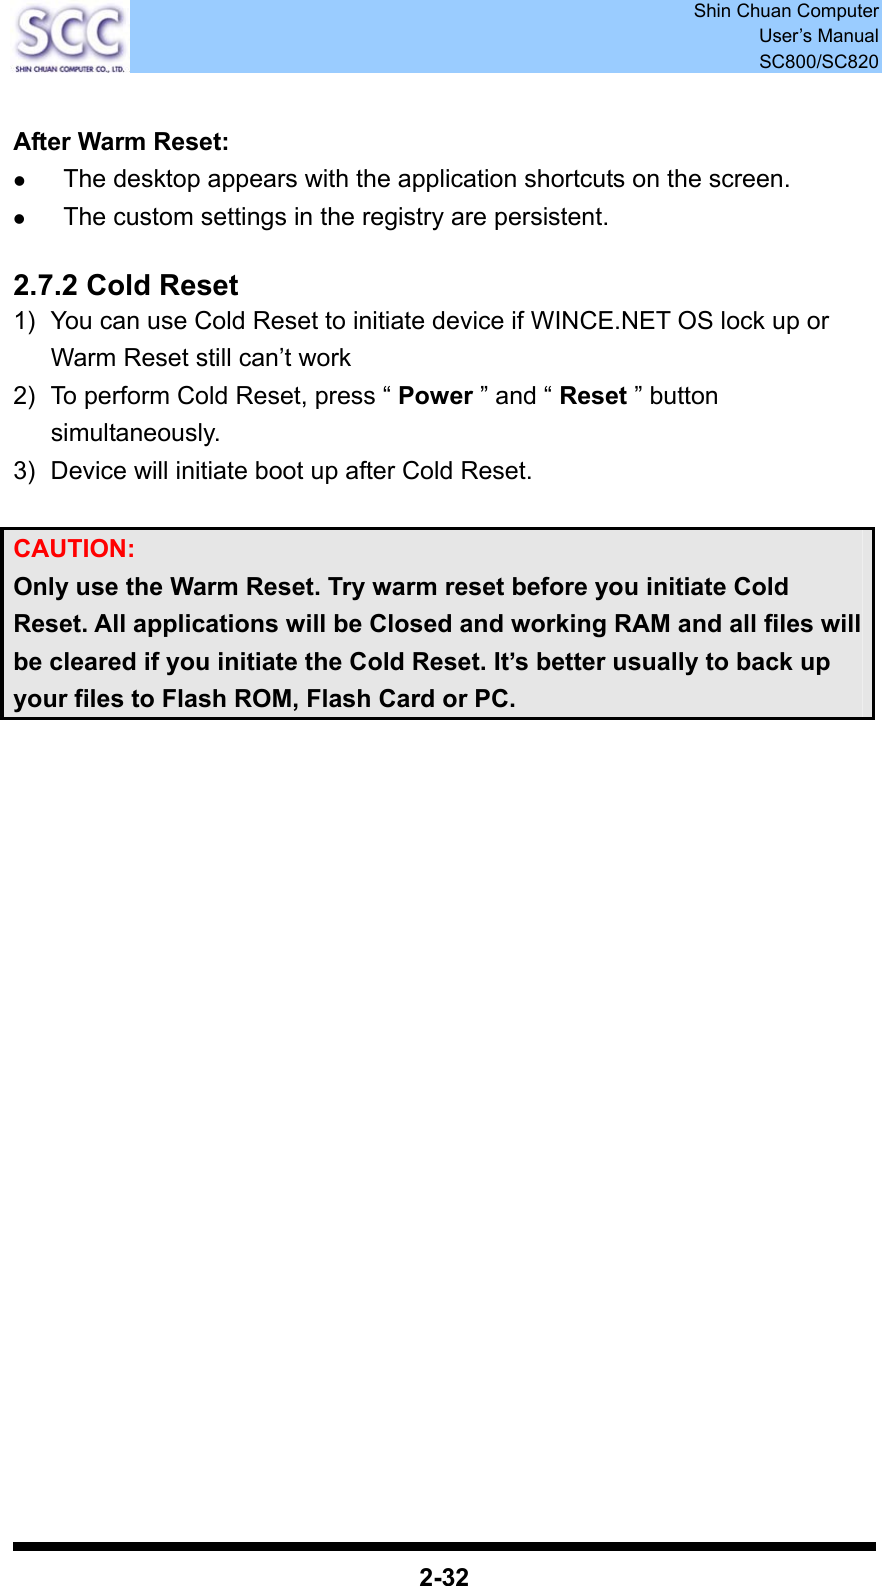  Shin Chuan Computer User’s Manual SC800/SC820  2-32  After Warm Reset: z The desktop appears with the application shortcuts on the screen. z The custom settings in the registry are persistent.  2.7.2 Cold Reset 1)  You can use Cold Reset to initiate device if WINCE.NET OS lock up or Warm Reset still can’t work 2)  To perform Cold Reset, press “ Power ” and “ Reset ” button simultaneously. 3)  Device will initiate boot up after Cold Reset.  CAUTION:  Only use the Warm Reset. Try warm reset before you initiate Cold Reset. All applications will be Closed and working RAM and all files will be cleared if you initiate the Cold Reset. It’s better usually to back up your files to Flash ROM, Flash Card or PC. 